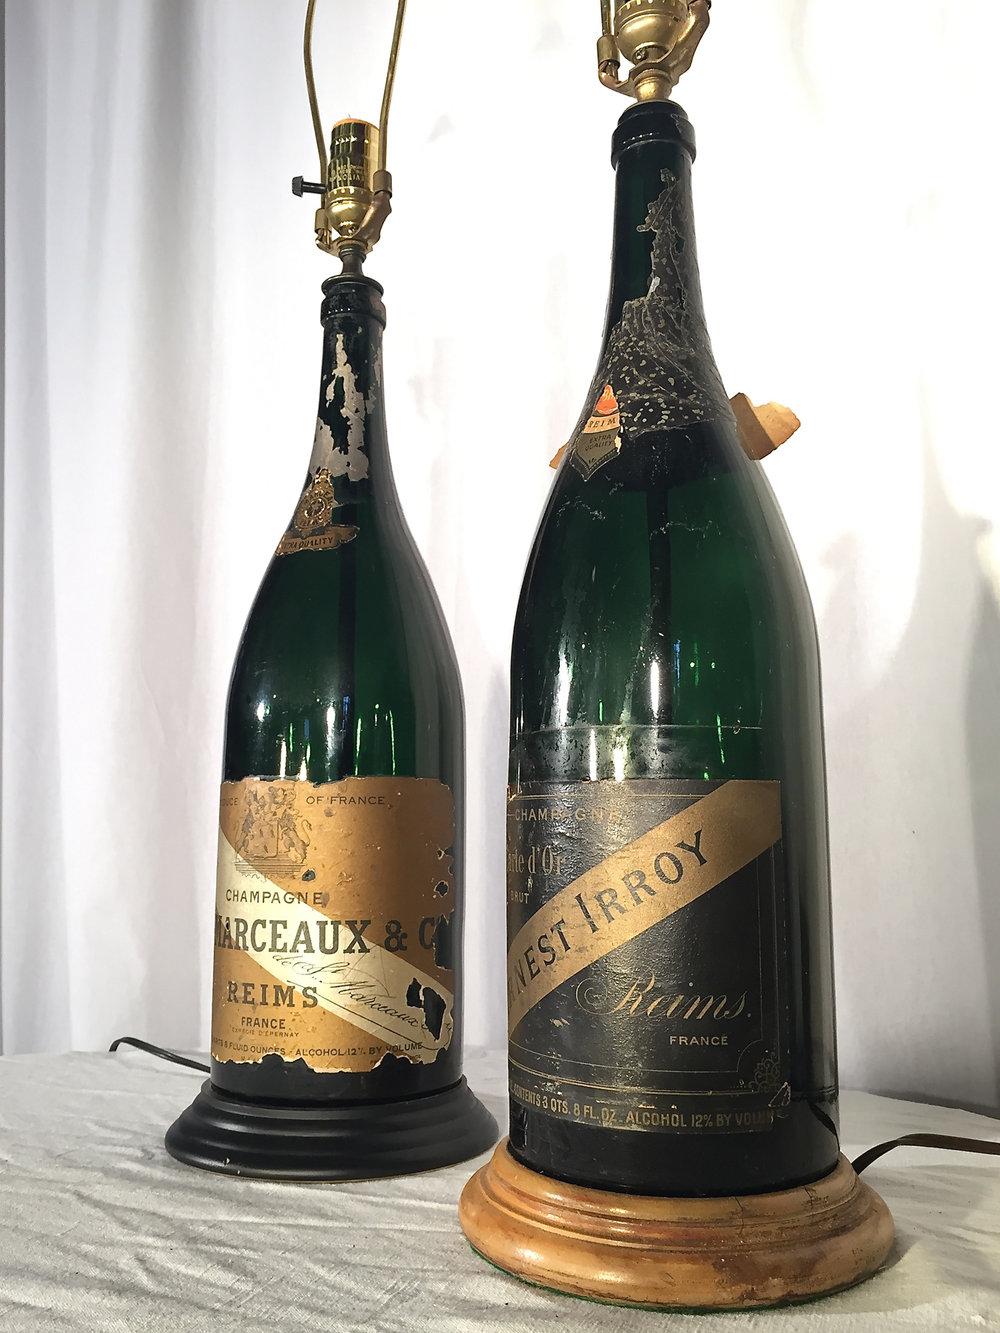 We love these vintage champagne bottles that have been transformed into lamps, even though they are from two different champagne makers (Irrey and St. Marceaux) and sport different bases. Perfect atop a tasting table in your wine cellar or on a